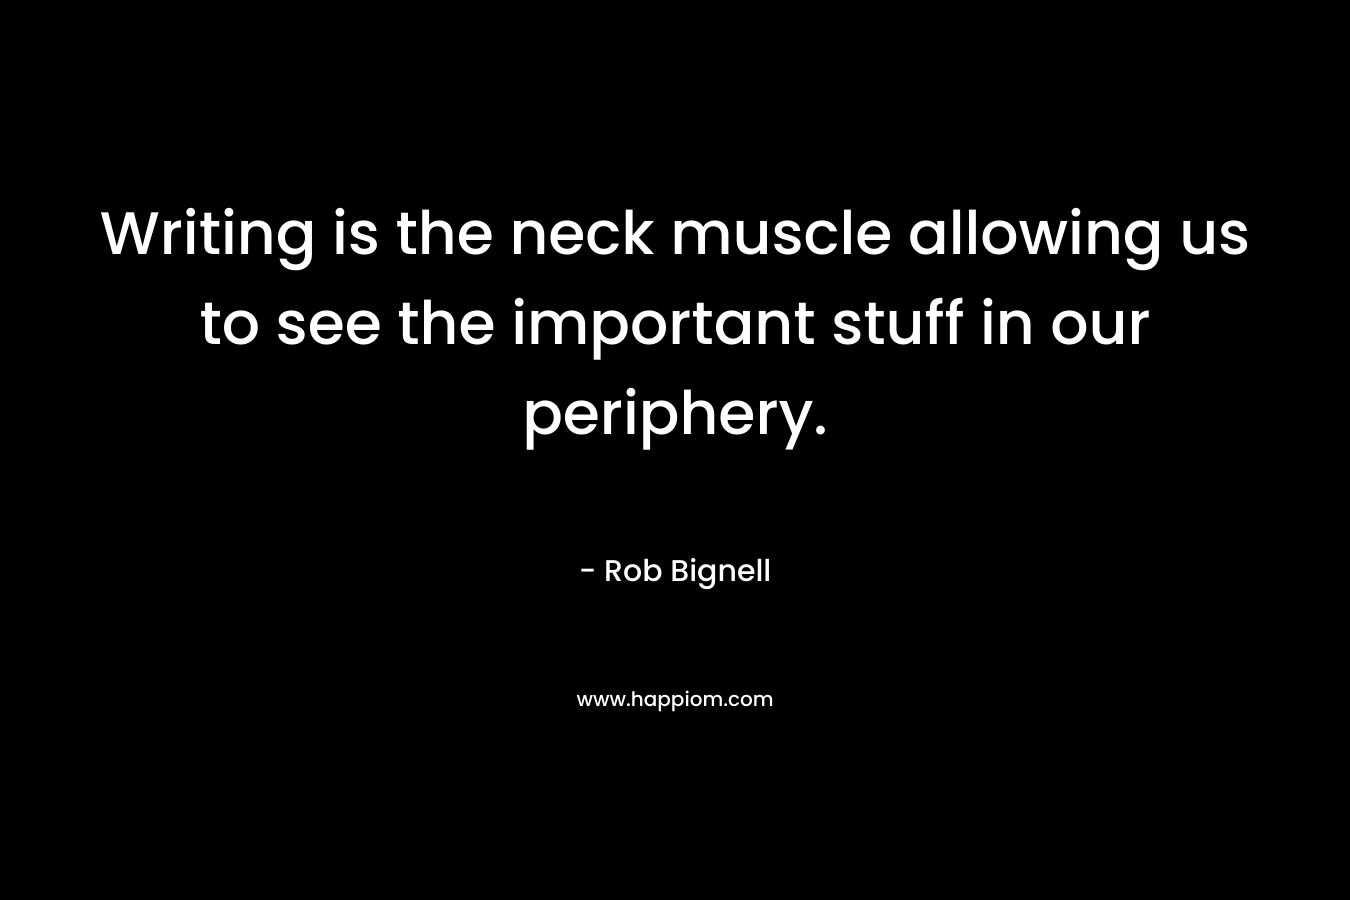 Writing is the neck muscle allowing us to see the important stuff in our periphery. – Rob Bignell